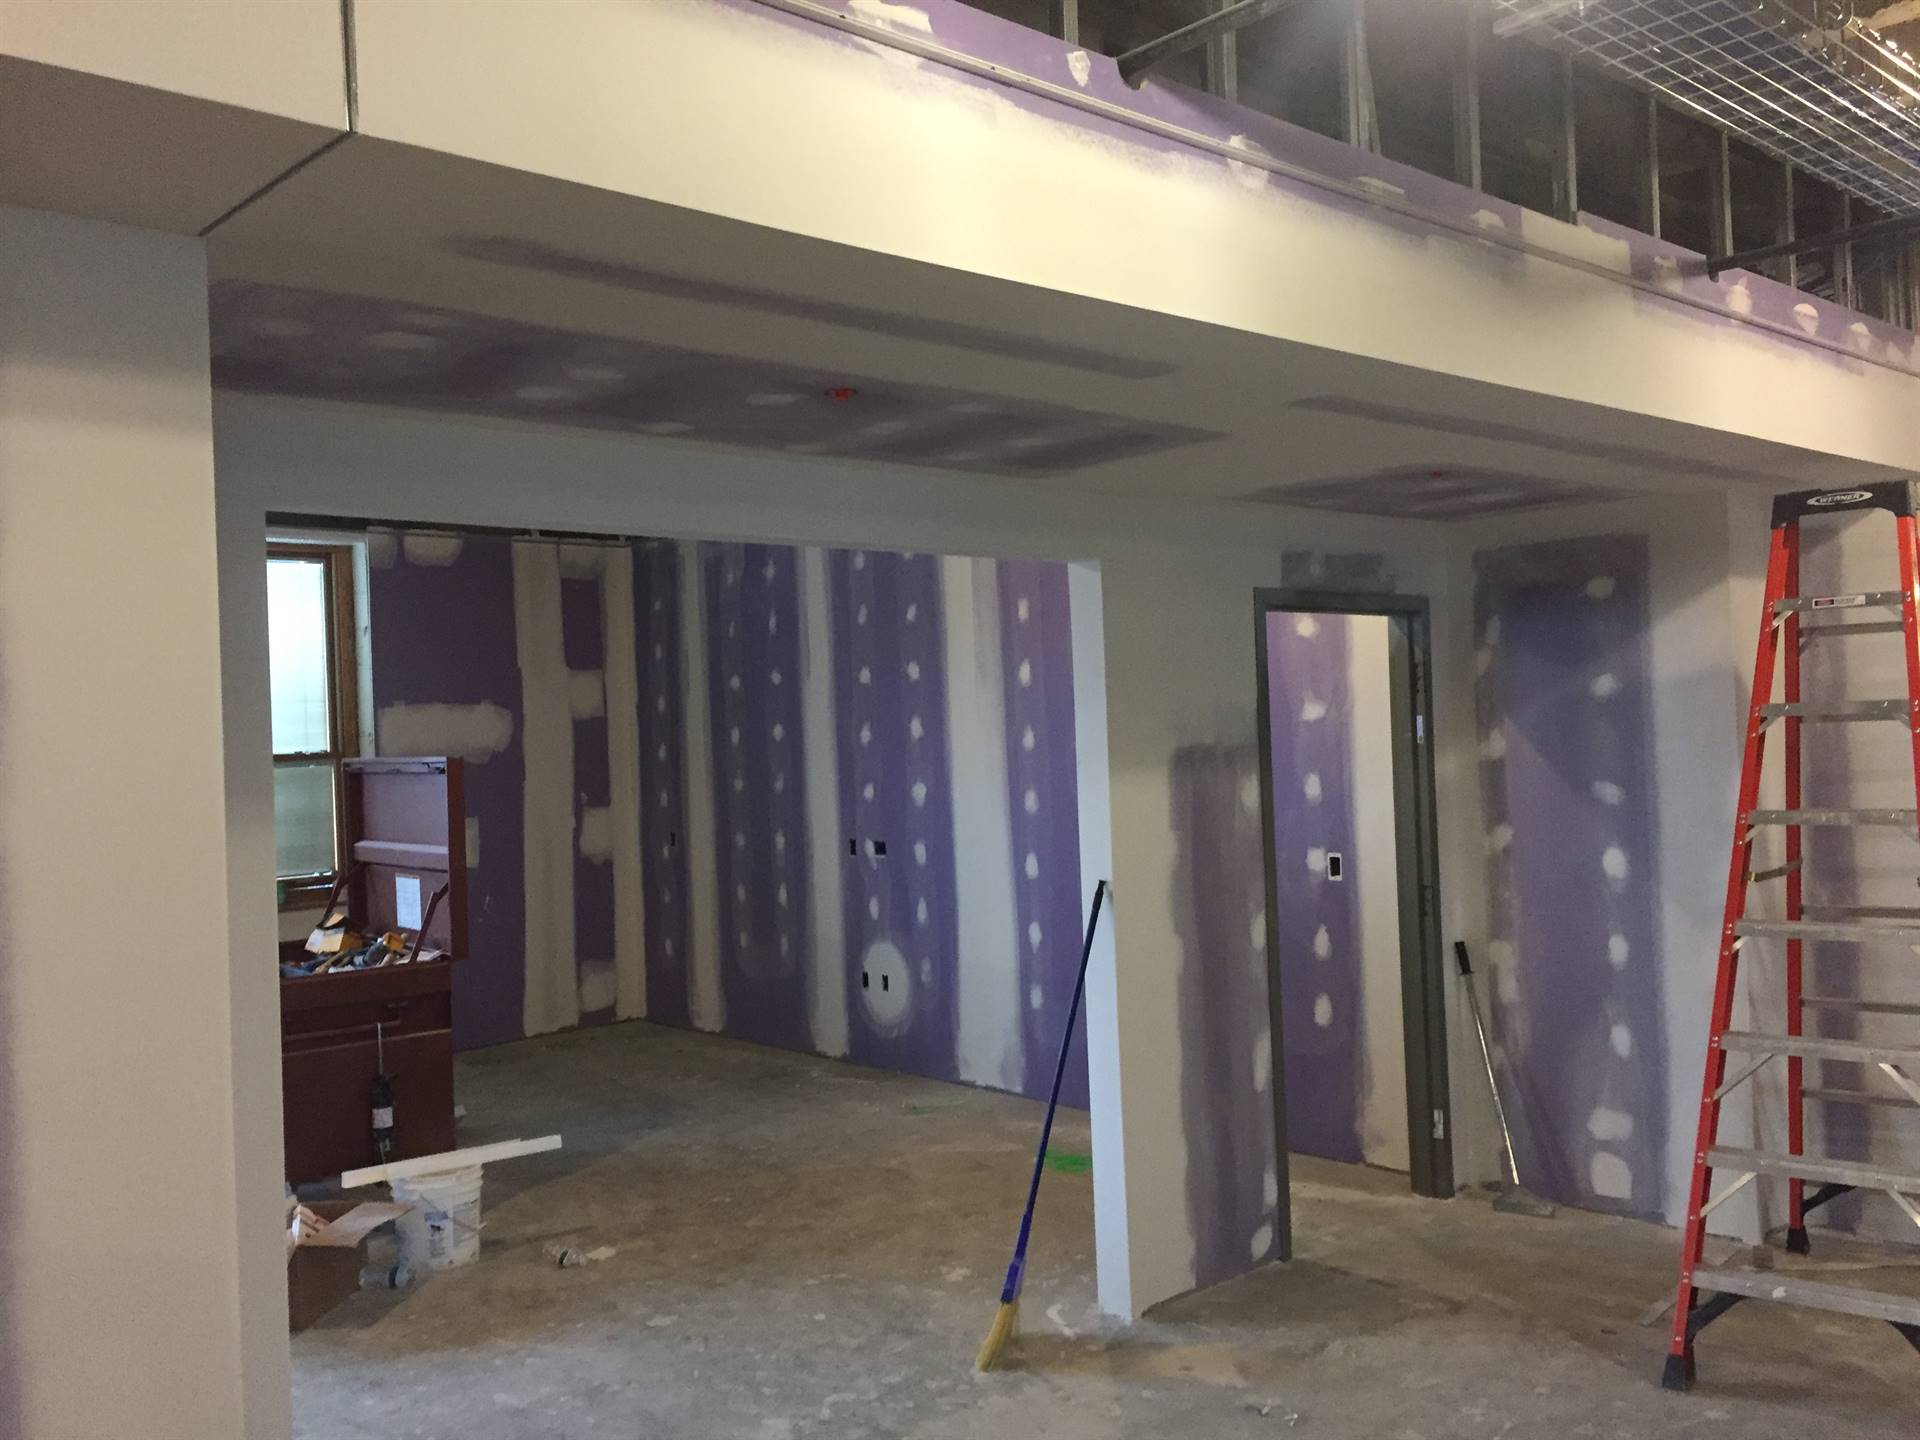 Interior of the Tremont Elementary project